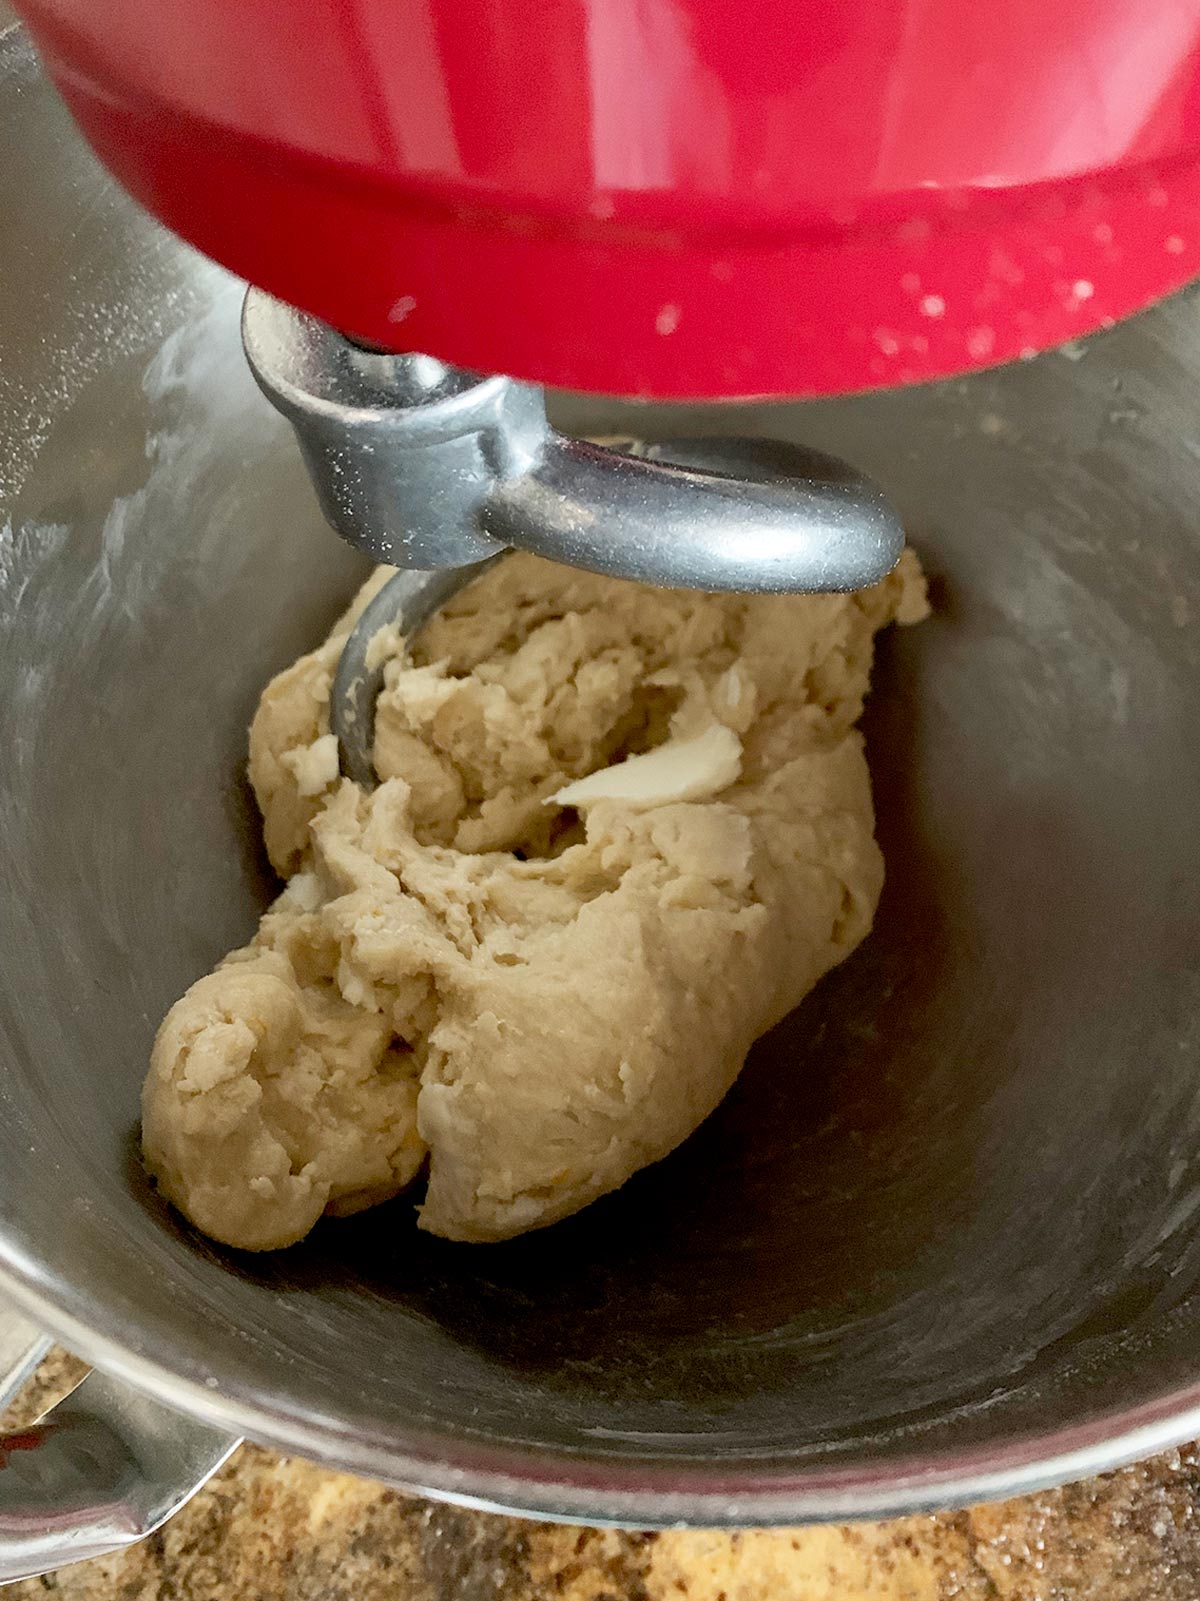 Babka dough in mixer and butter being added and incorporated.